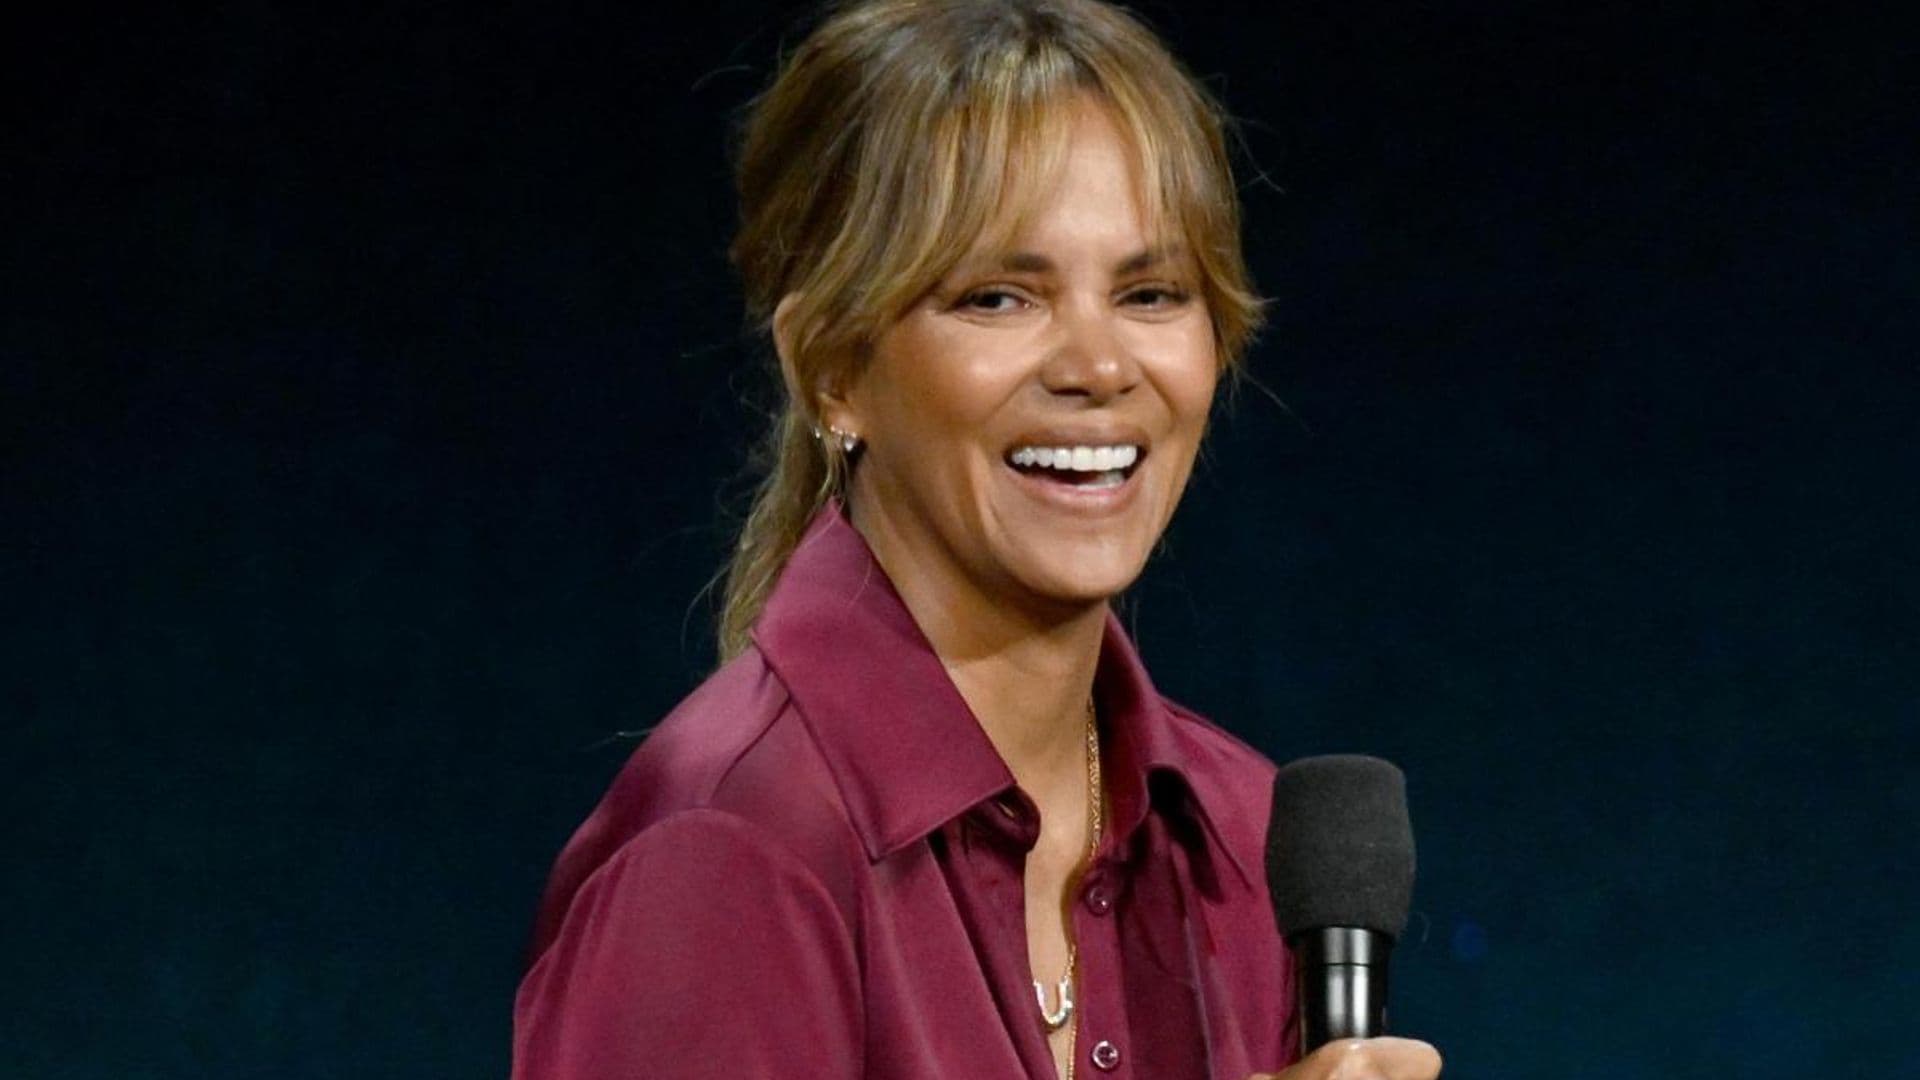 Halle Berry shares thrilled posts of her Cabo vacation